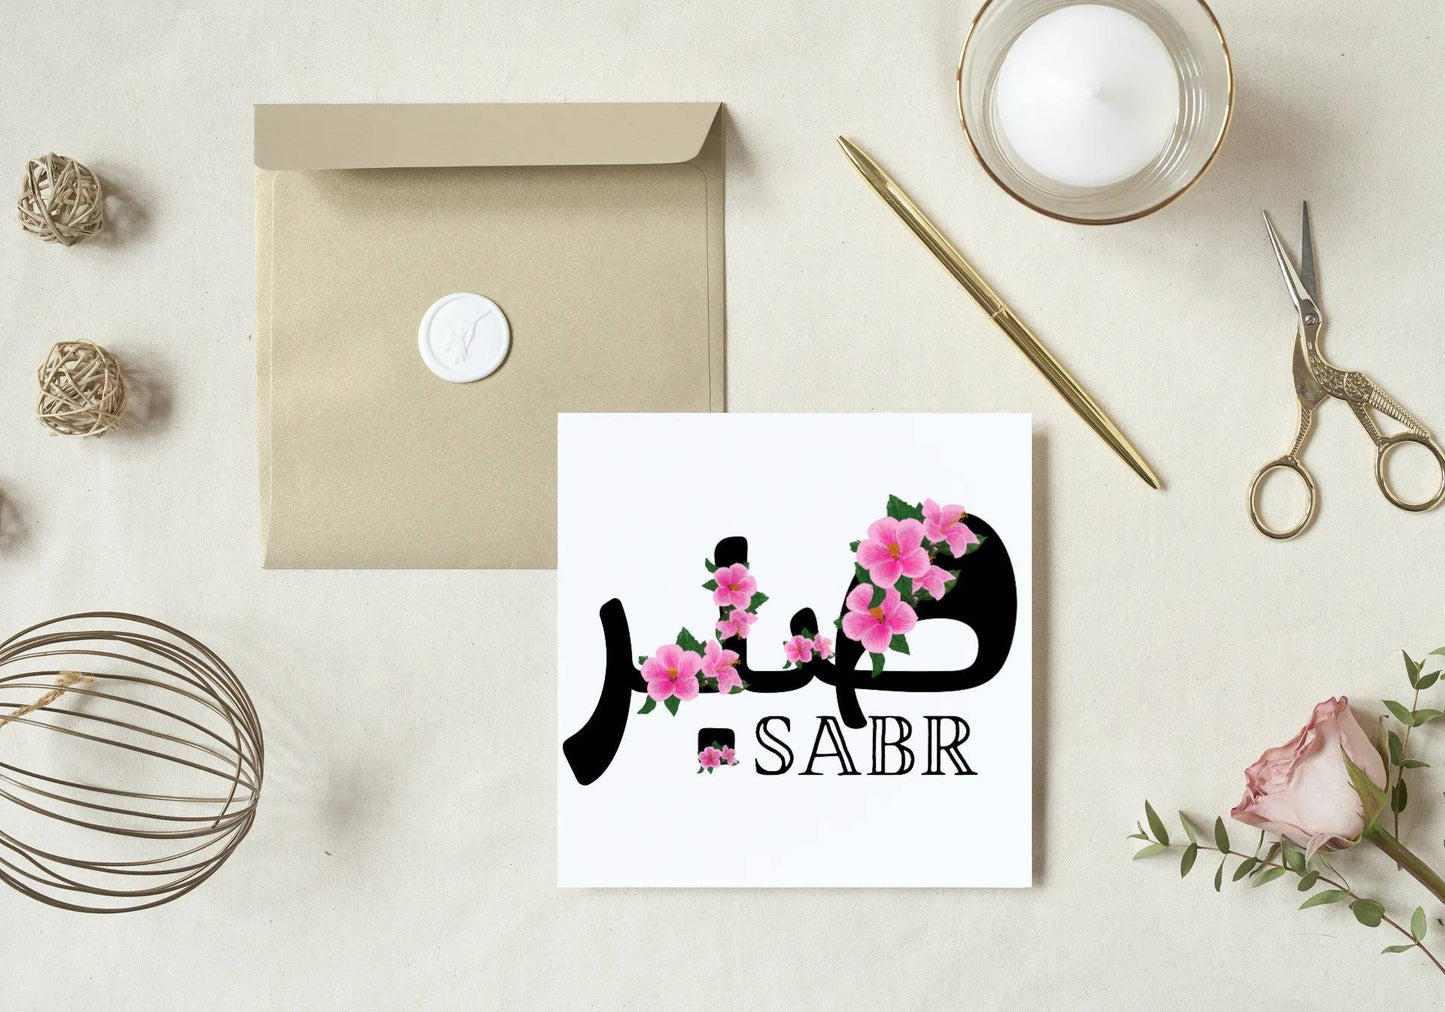 Floral Sabr greeting card, Arabic text greeting card, translation patience greeting card, ideal islamic gift